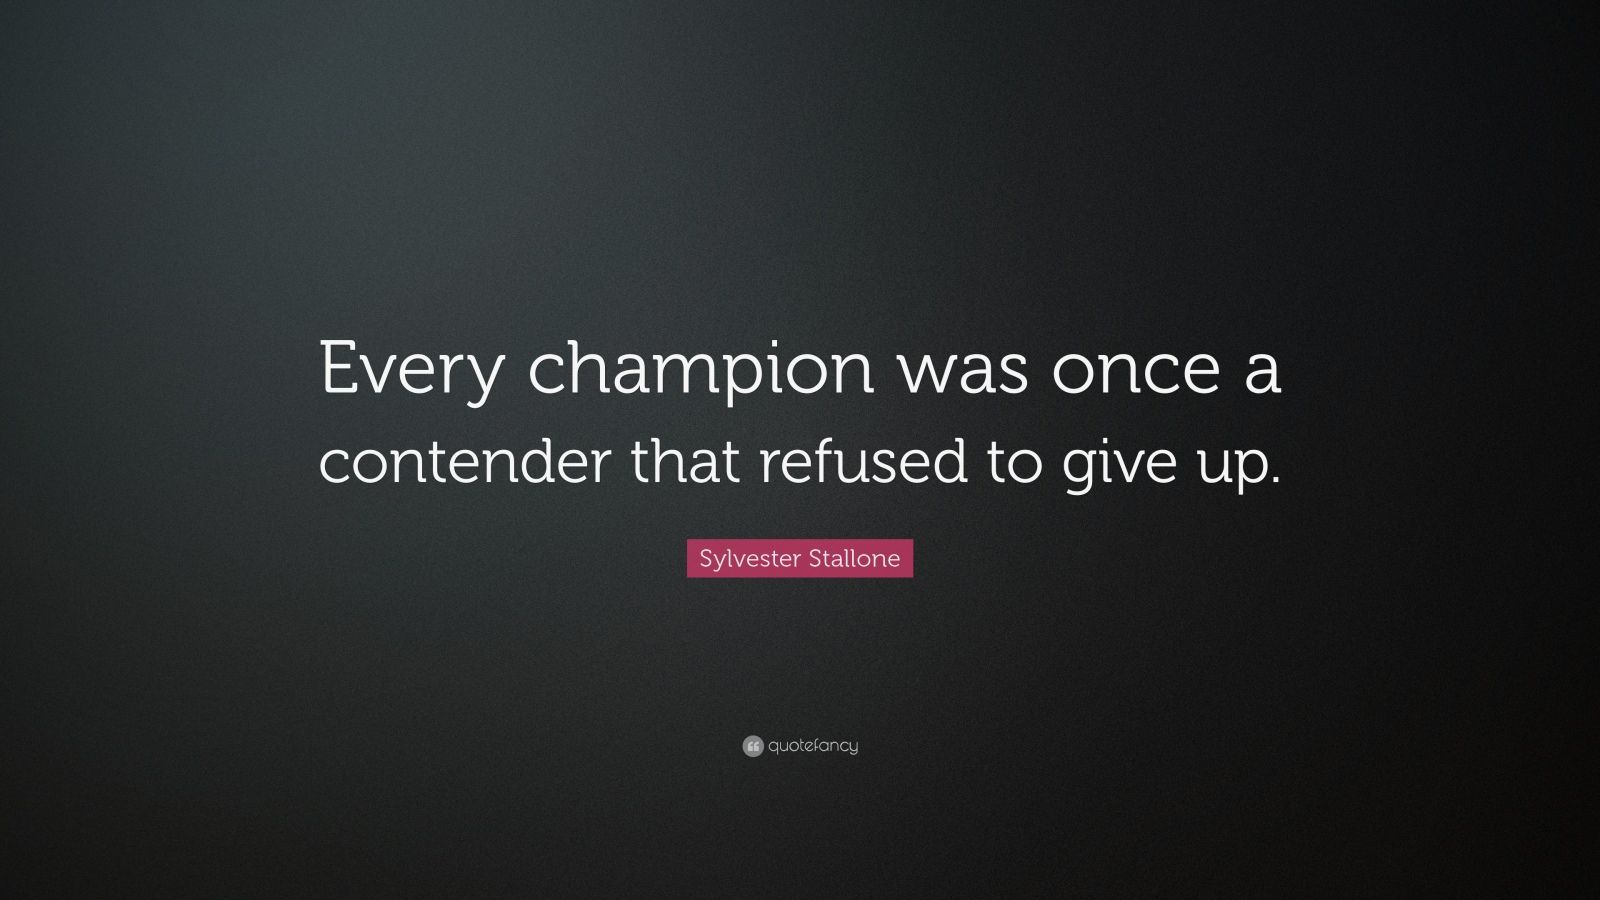 Sylvester Stallone Quote: “Every champion was once a contender that ...